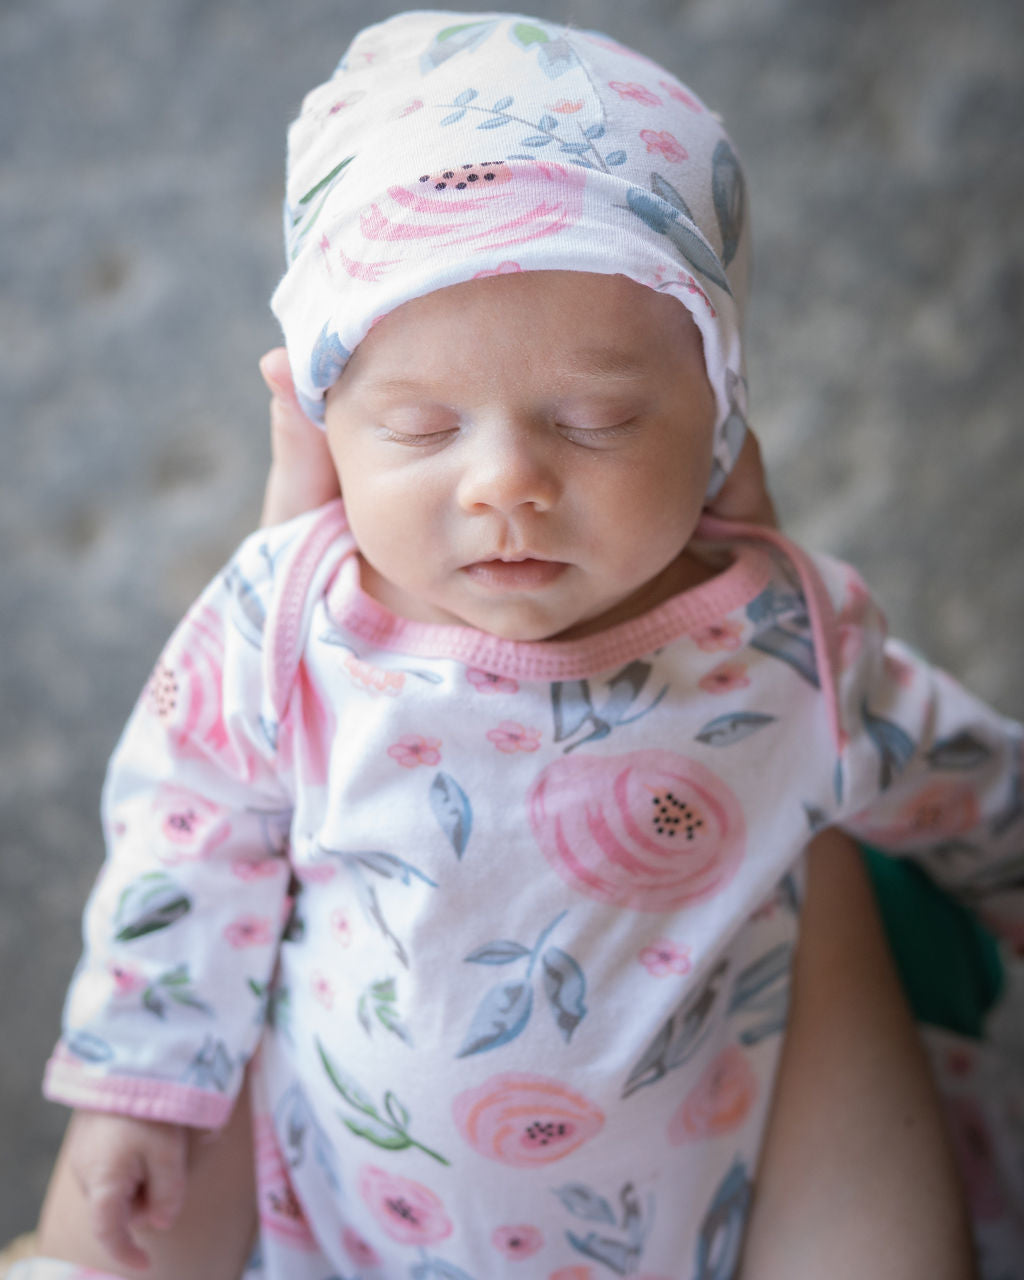 Ivy Floral Baby Coming Home Outfit & Matching Newborn Hat Set 2pc.